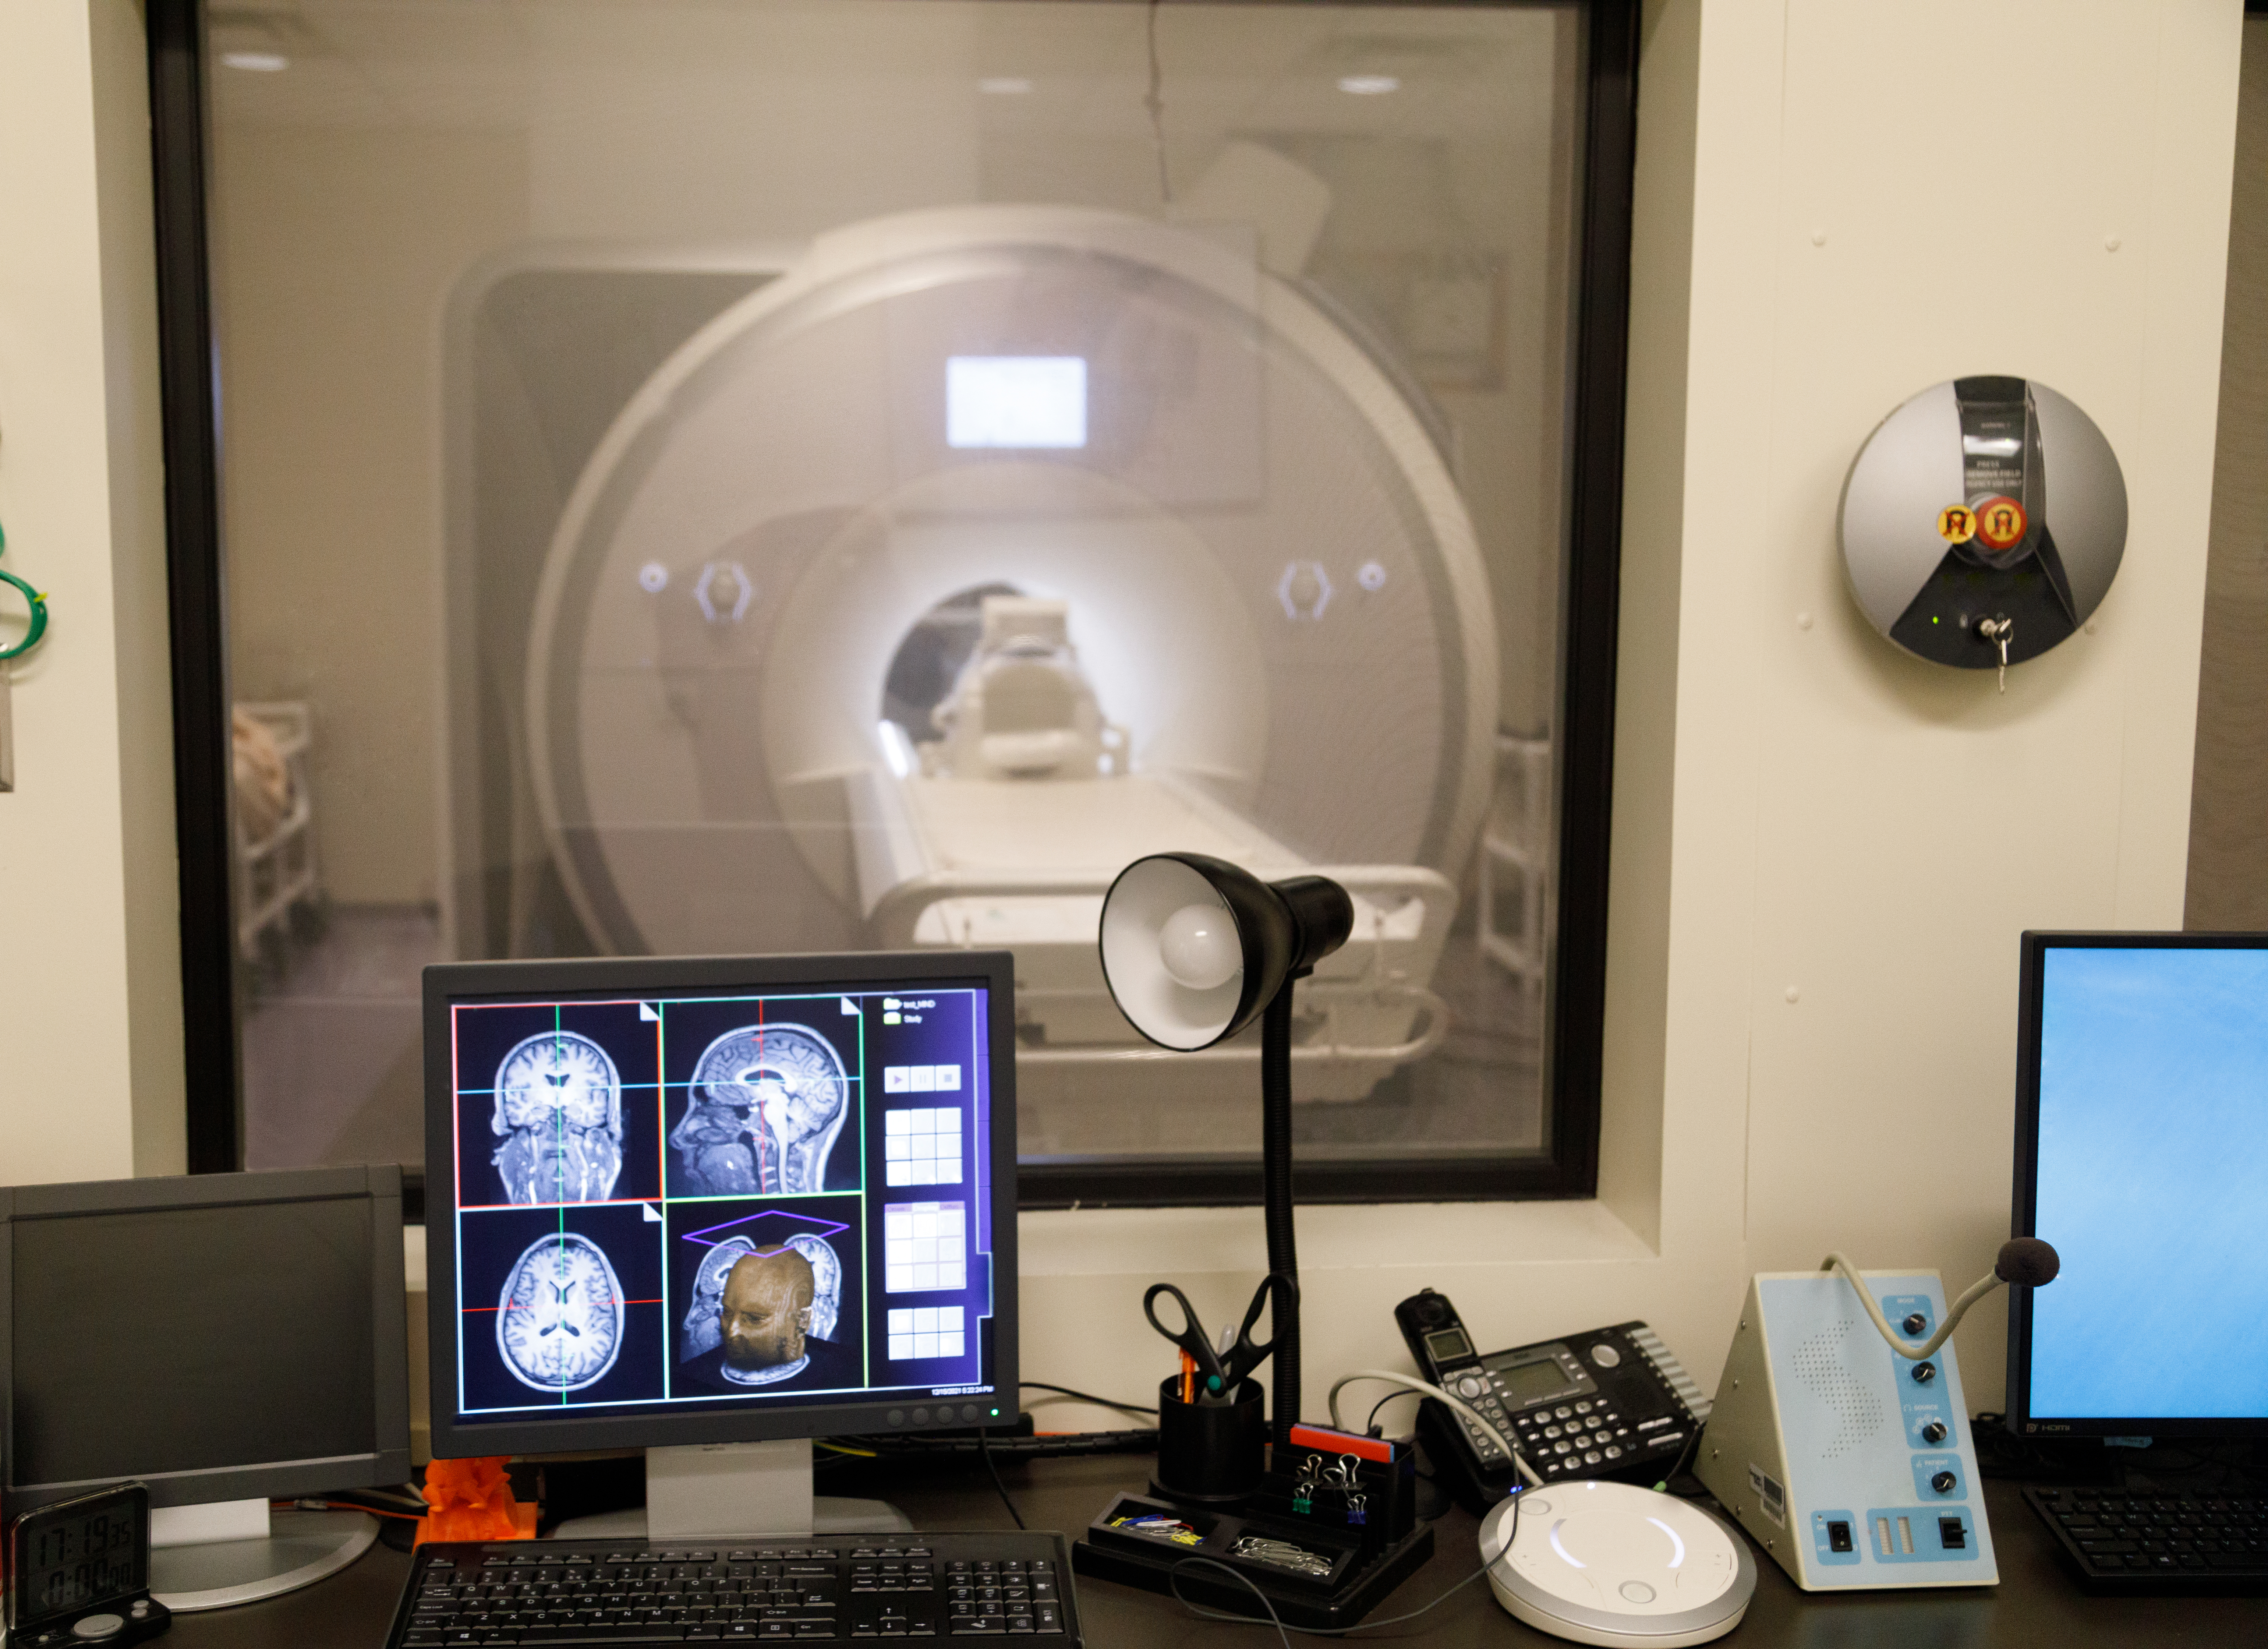 An image showing an FMRI machine with computer screens showing brain images. Credit: iStock/patrickheagney.